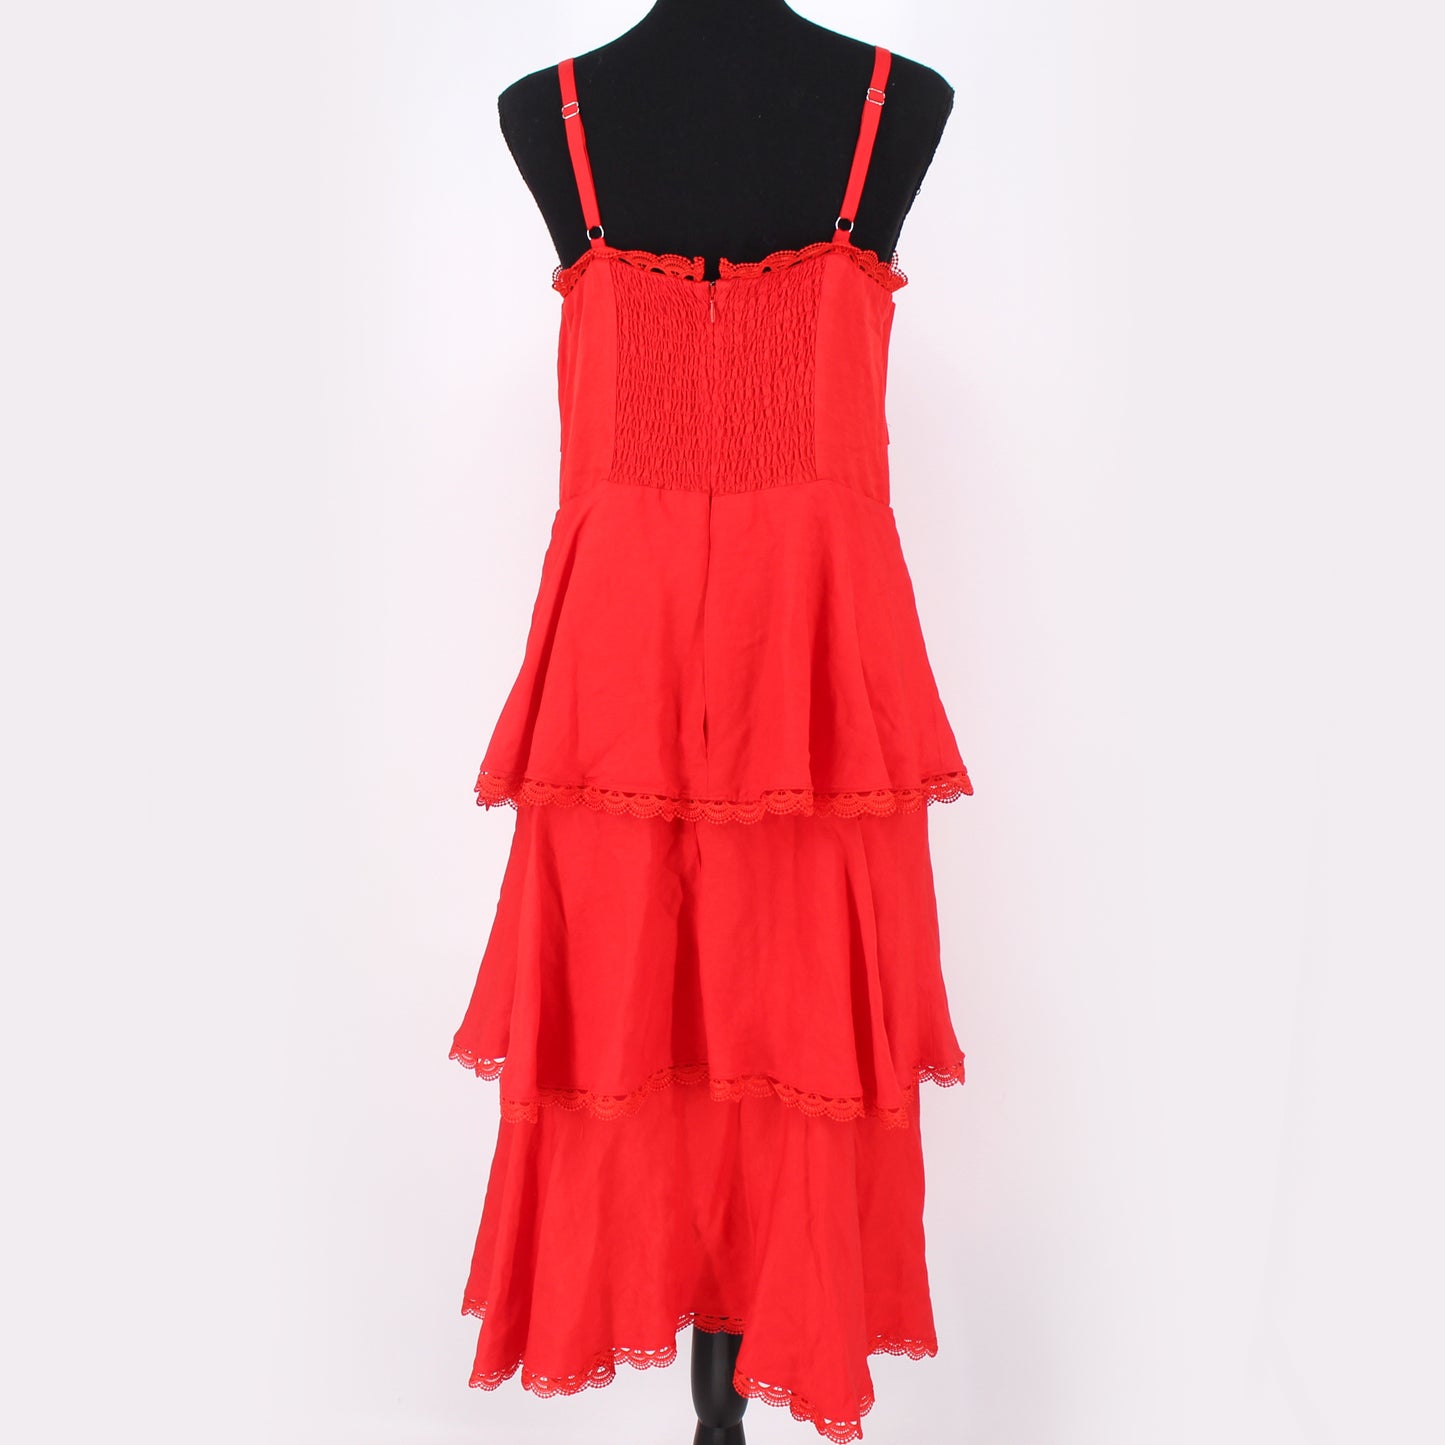 Marchesa Notte Red Tiered Lace Trim Sleeveless Midi Dress